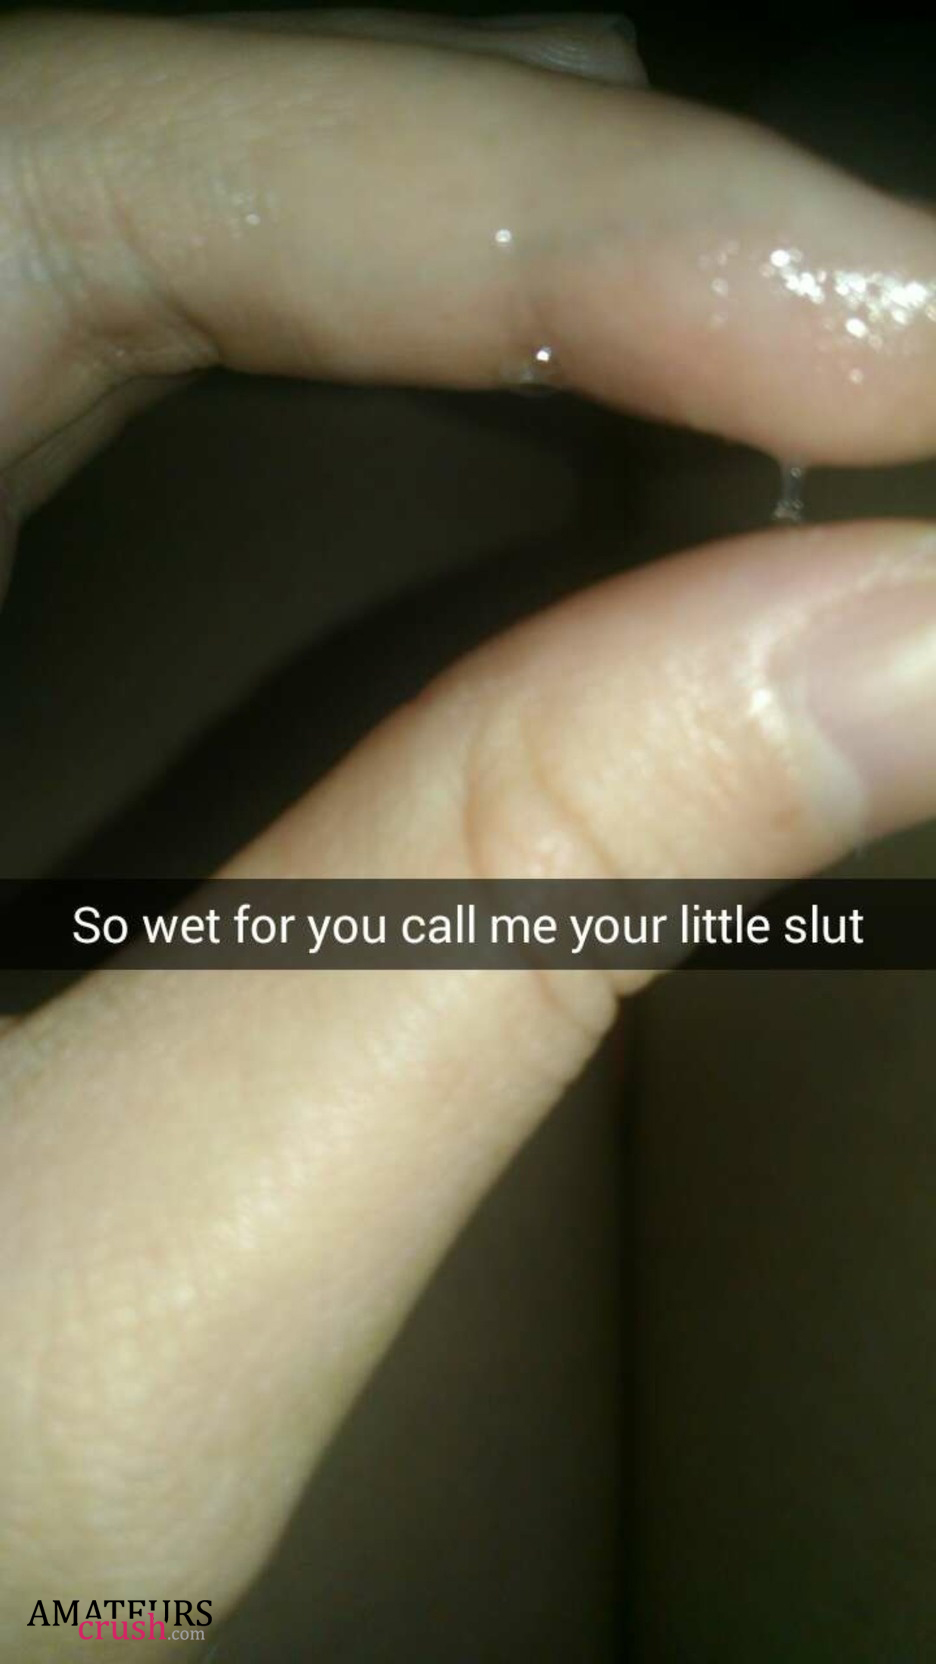 Beetle reccomend wet pussy snapchat